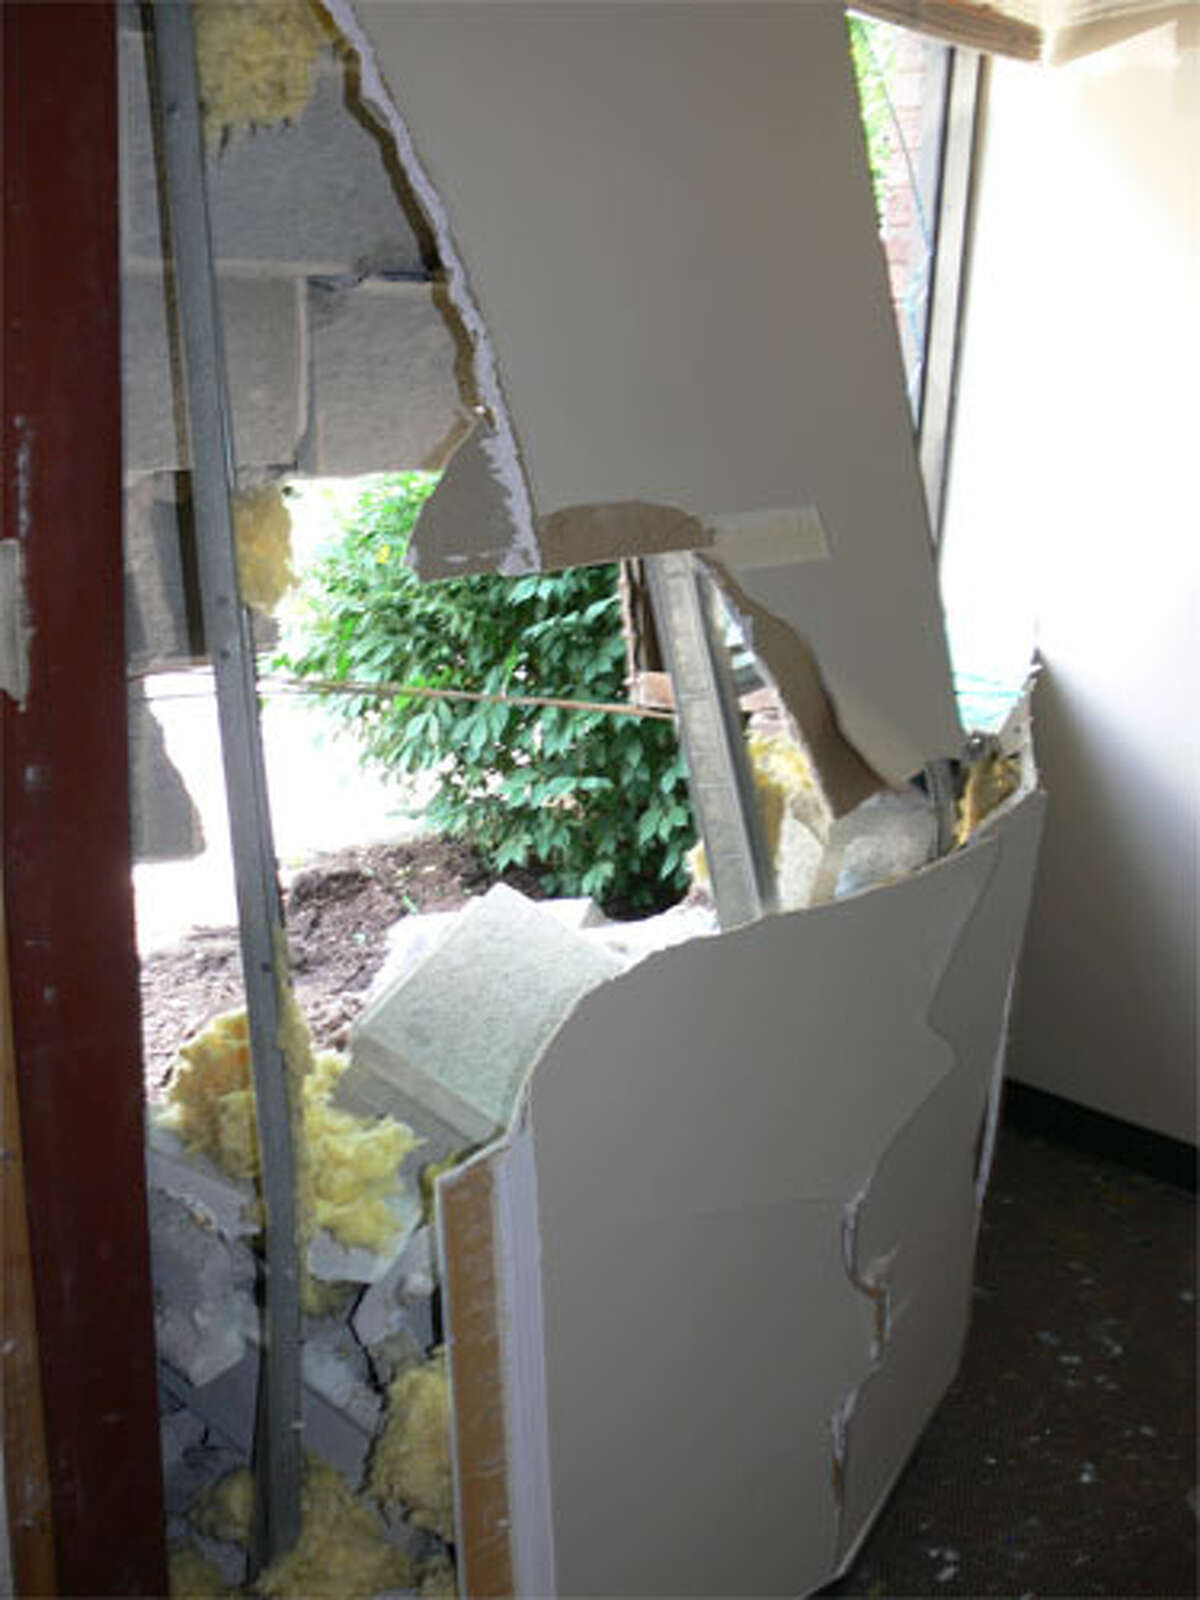 A view of the damage from inside Centrix Executive Vice President John Discko’s office.